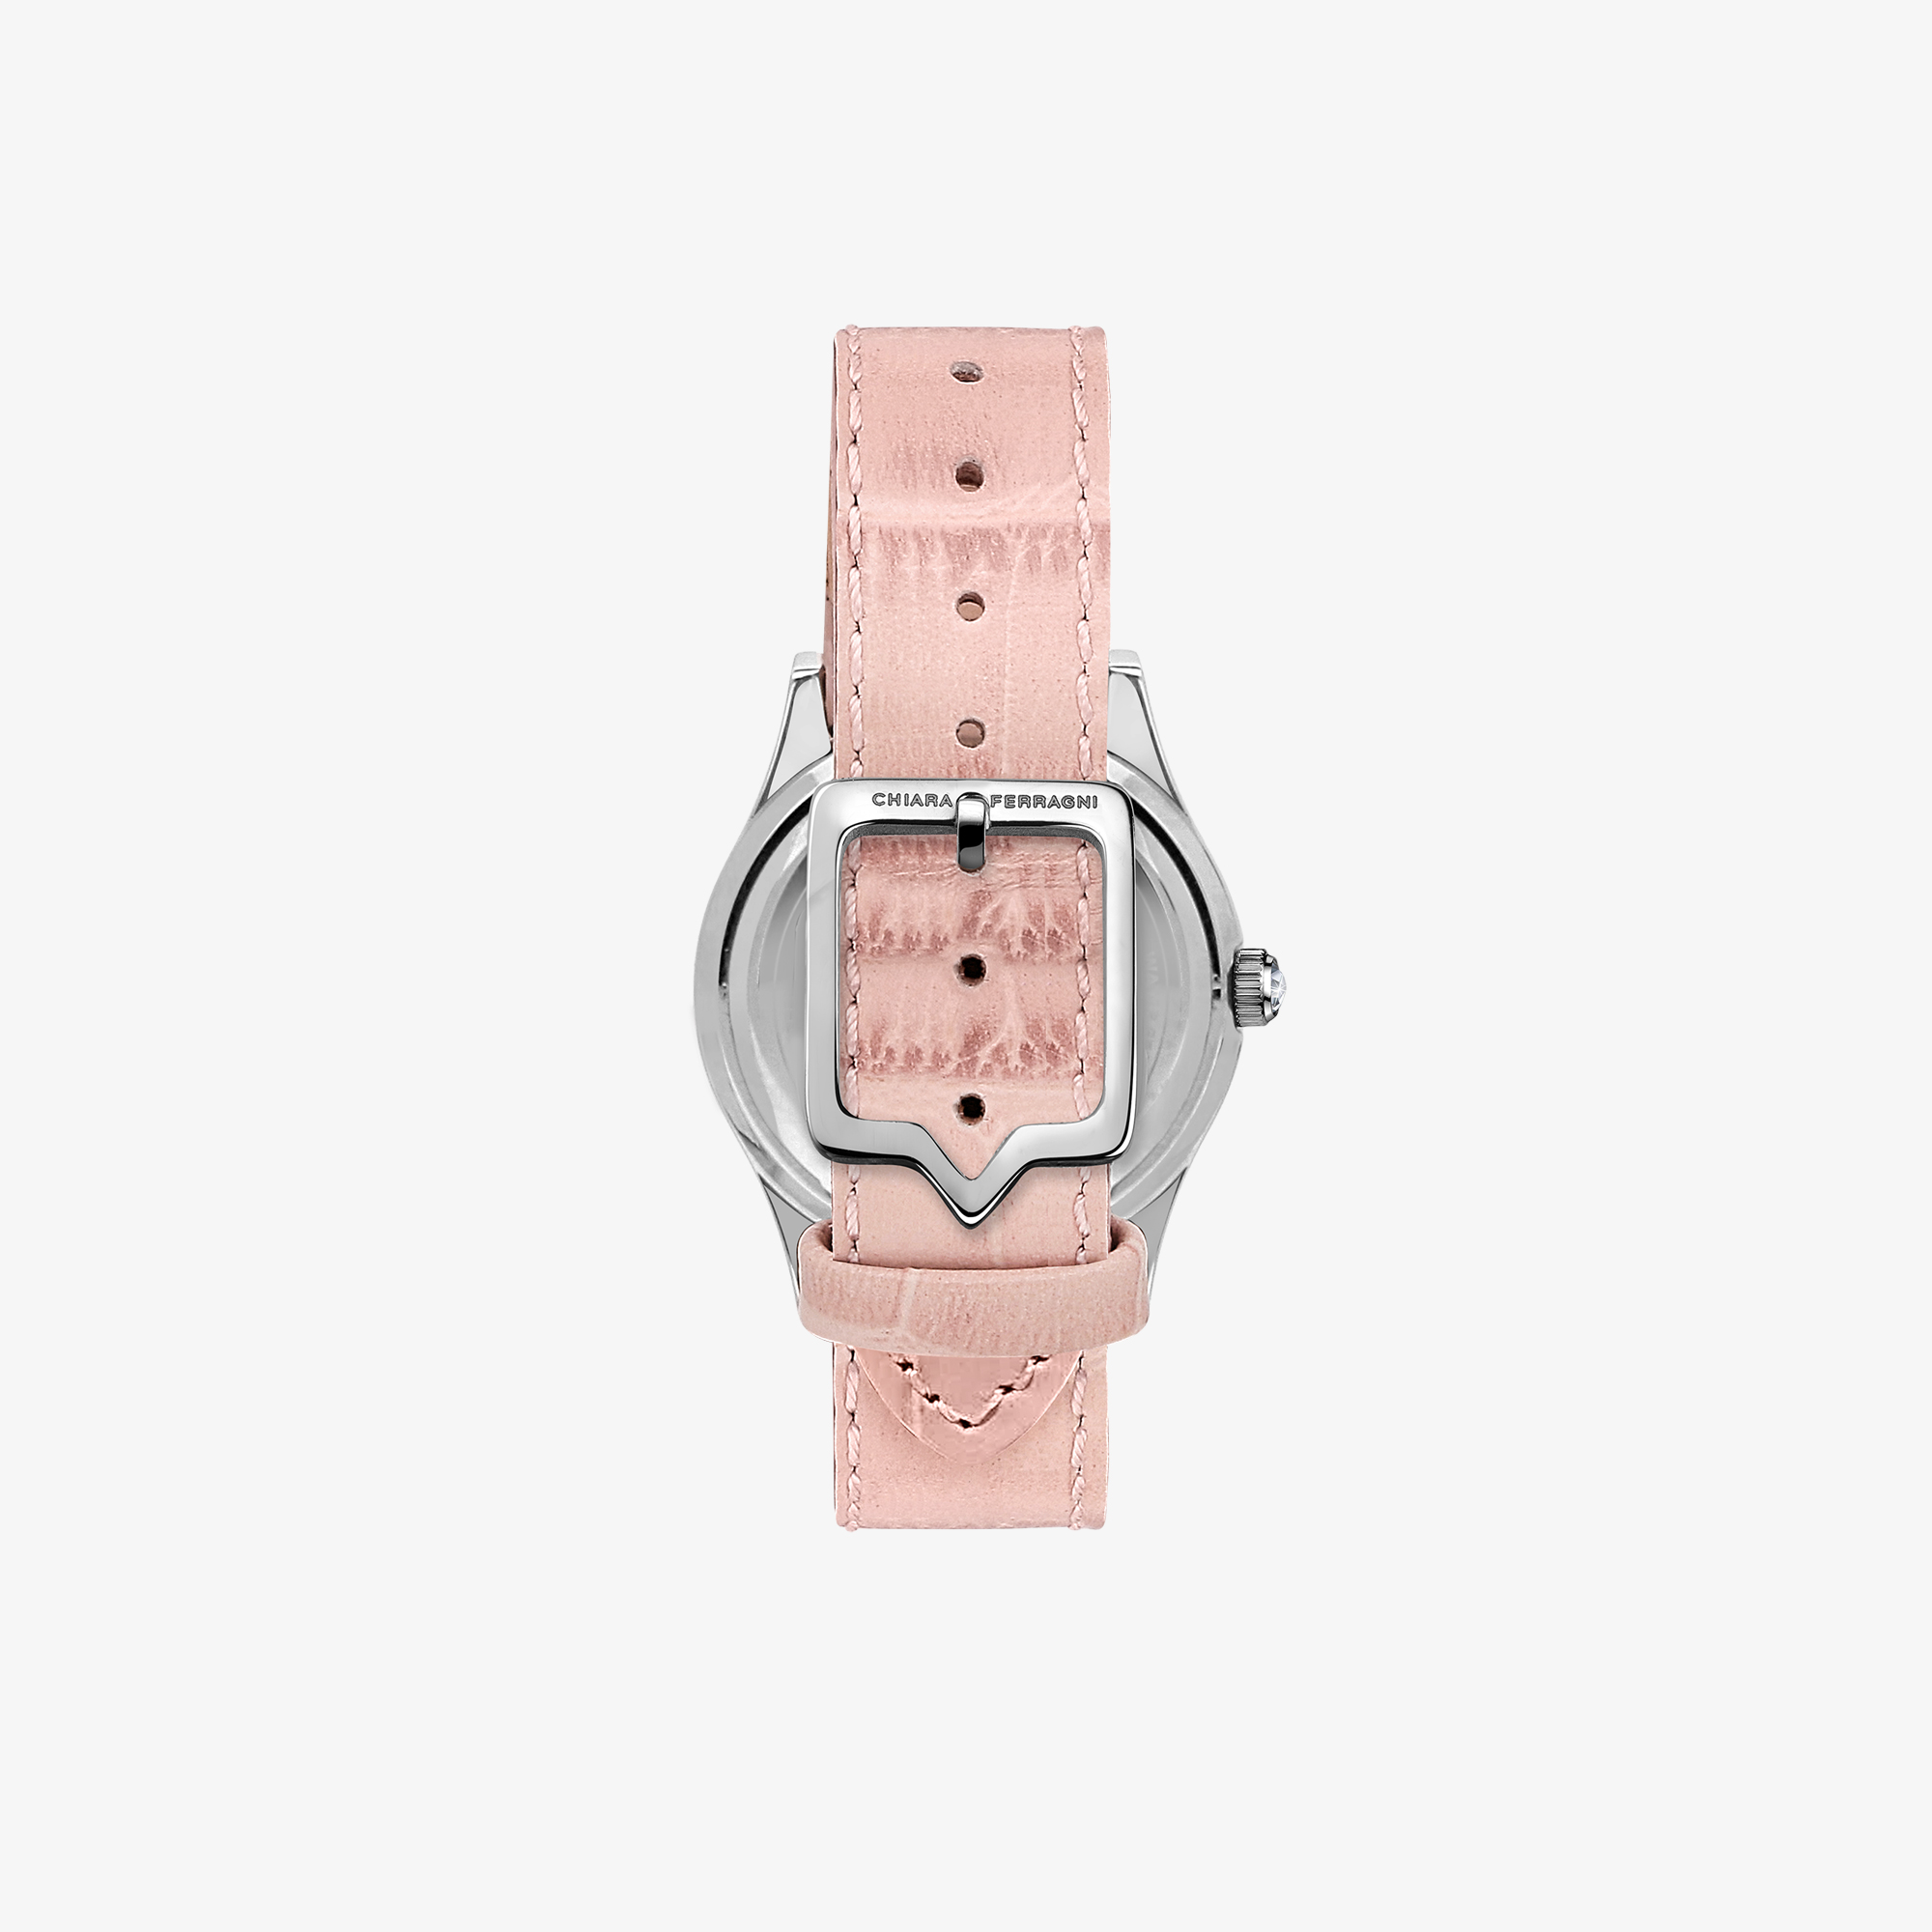 CHIARA FERRAGNI CONTEPORARY WATCH WITH PINK LEATHER STRAP